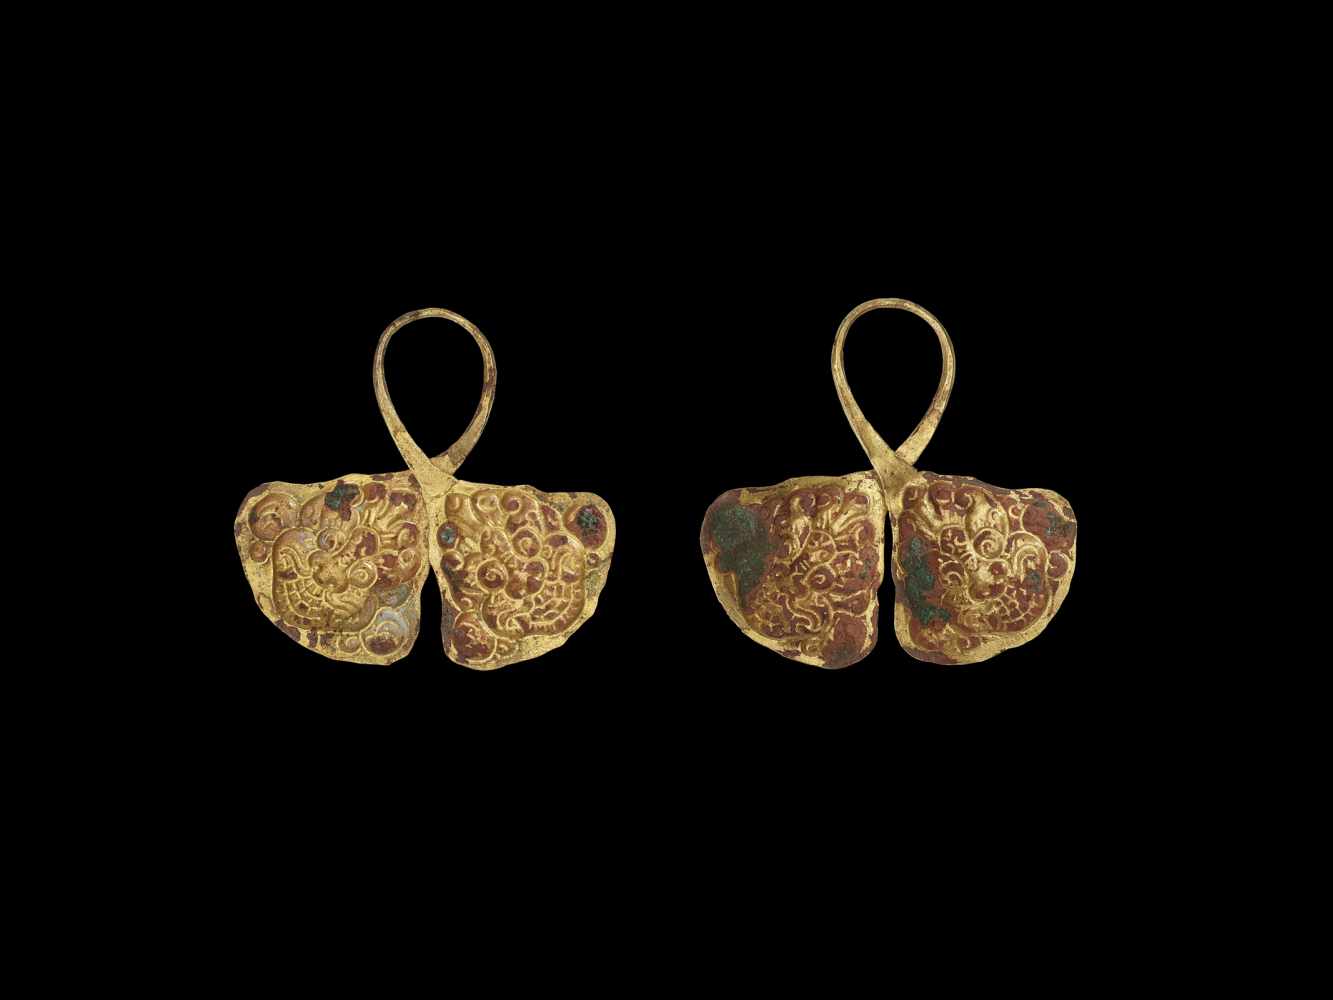 A PAIR OF CHAM REPOUSSÉ GOLD CROWN ORNAMENTS WITH GUARDIAN LIONS Champa, c. 8th – 9th century. The - Image 3 of 3